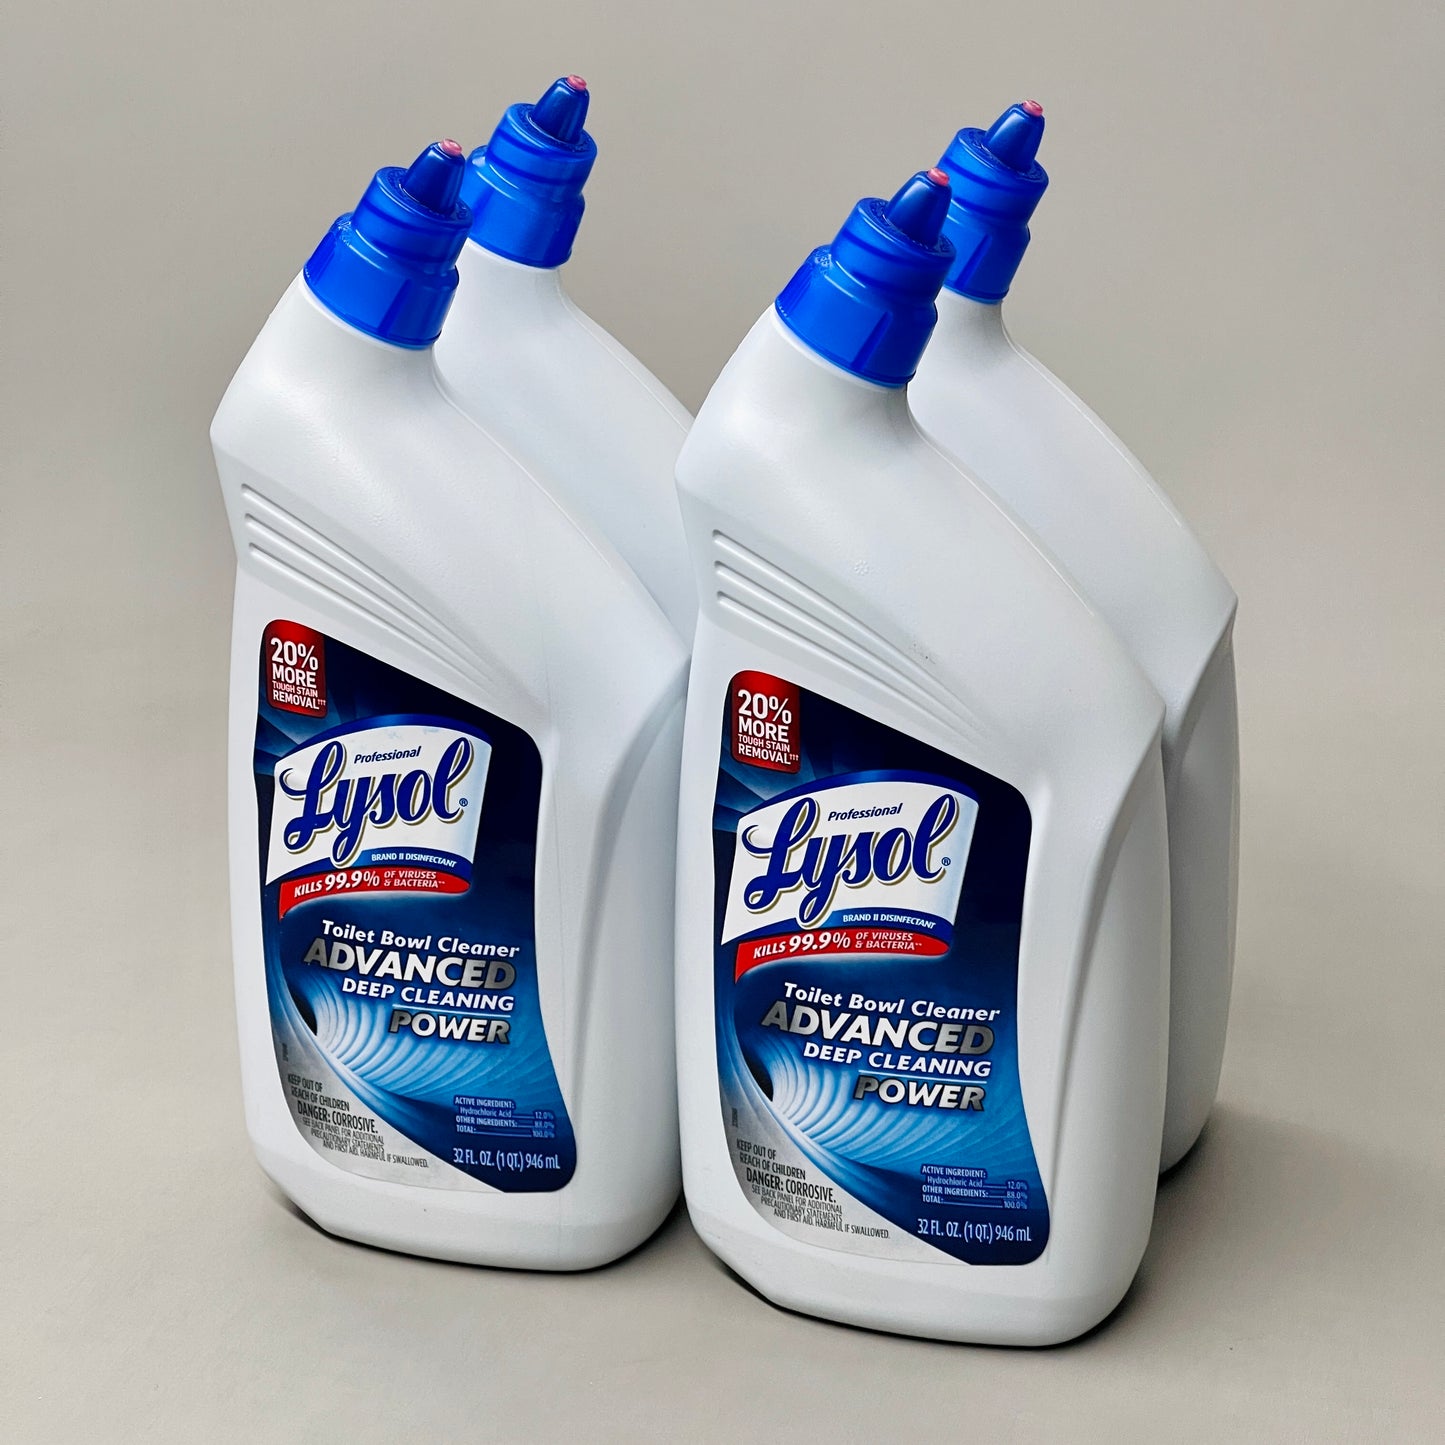 LYSOL Toilet Bowl Cleaner 4-PACK! Advanced Power Deep Cleaning 32 fl oz (New)